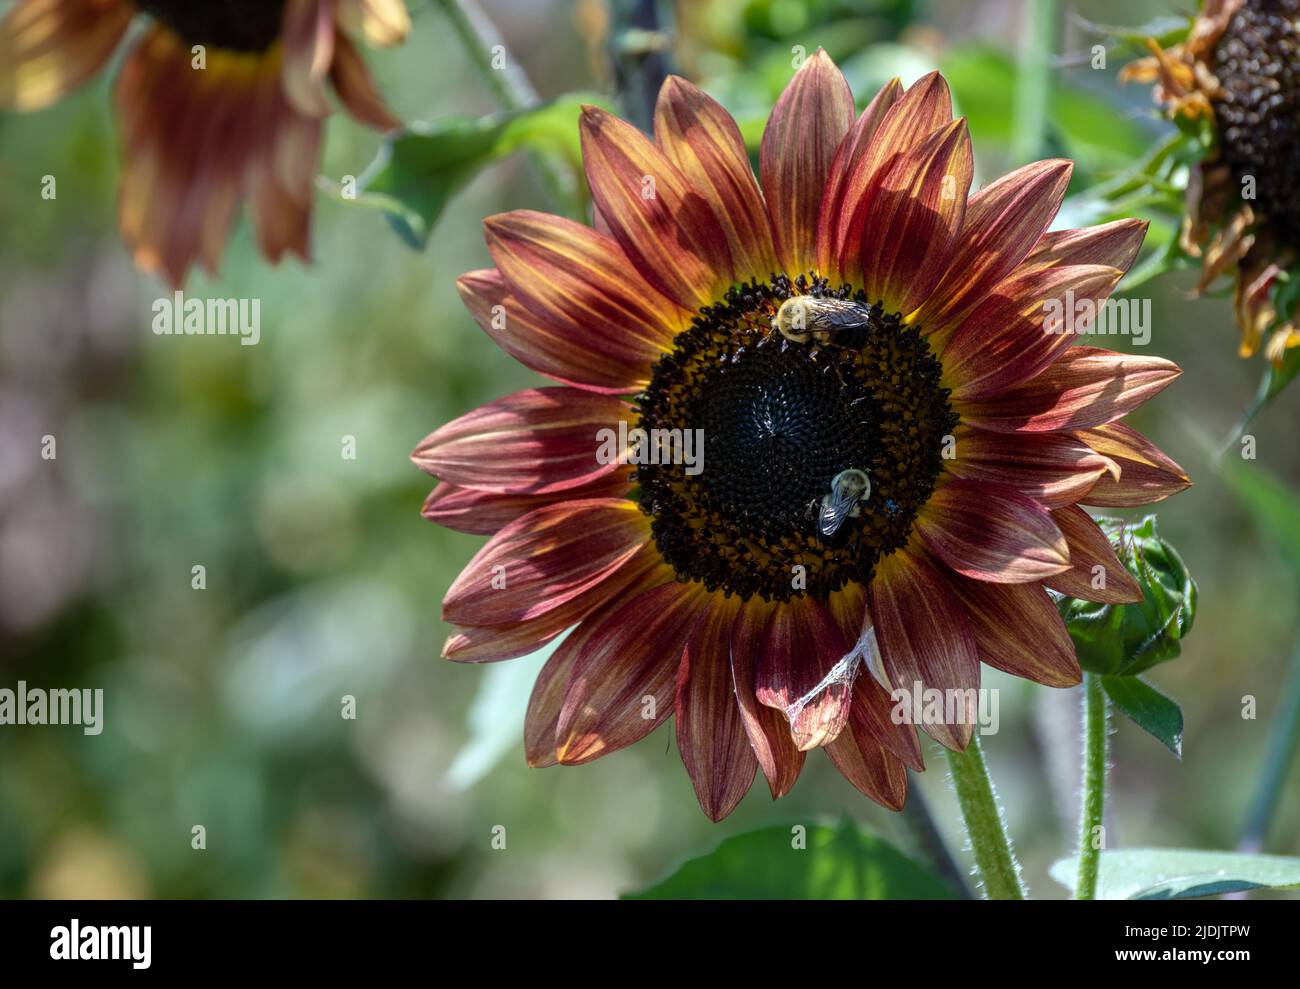 Two bumble bees enjoy a warm day and fresh pollen from a maroon colored sunflower. The large plant grows beautifuly in Missouri. Bokeh. Stock Photo